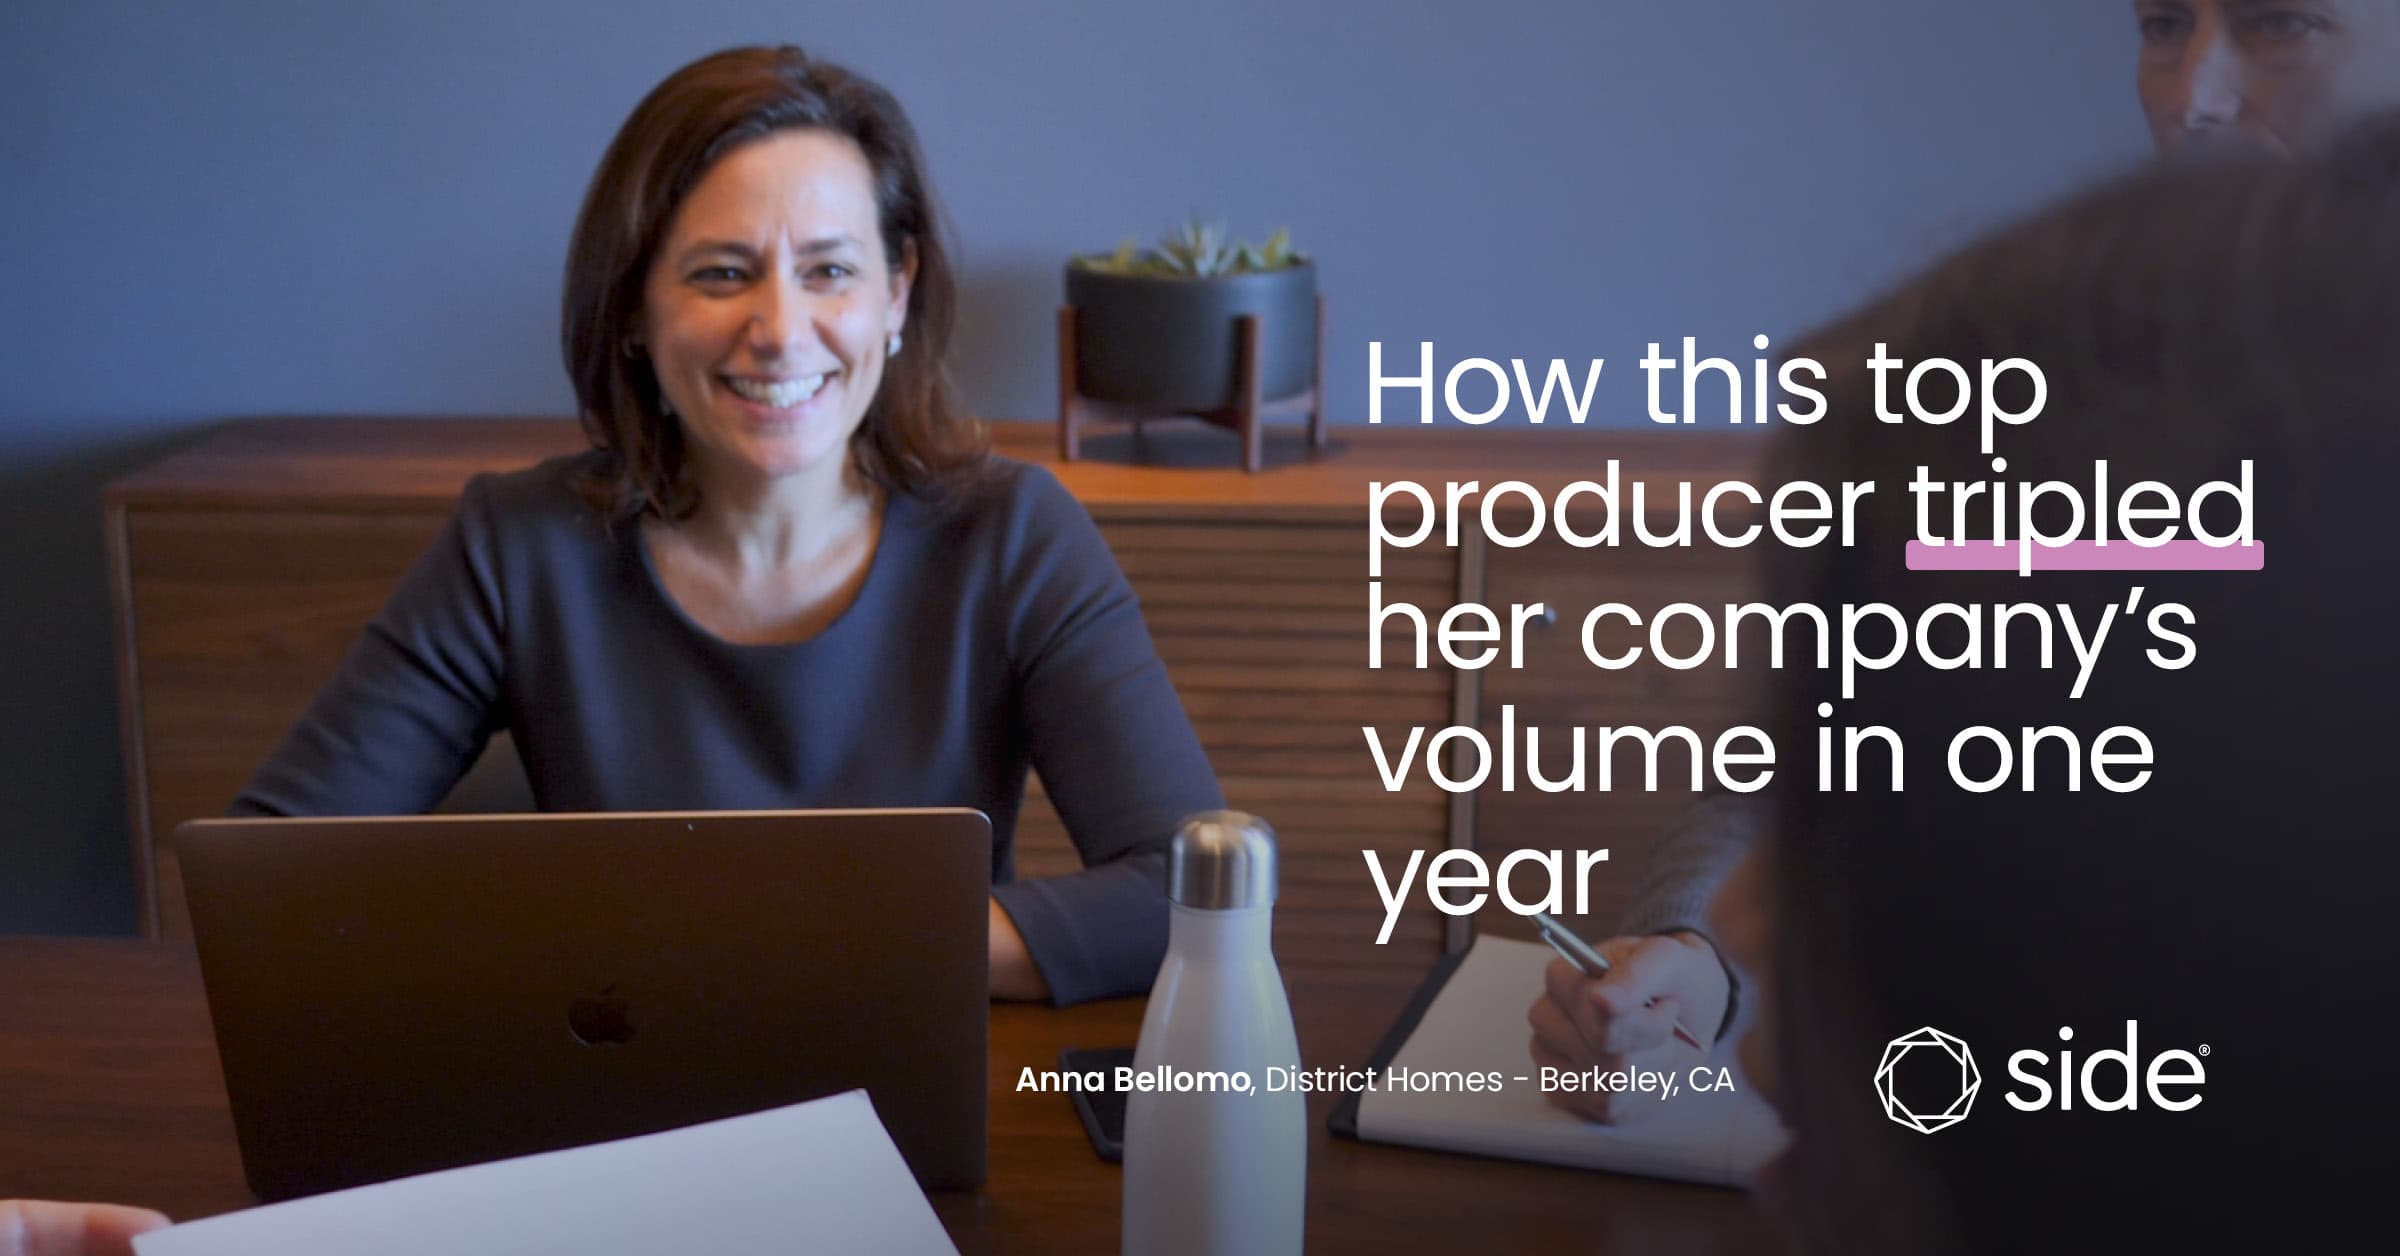 How this top producer tripled her company's volume in one year.